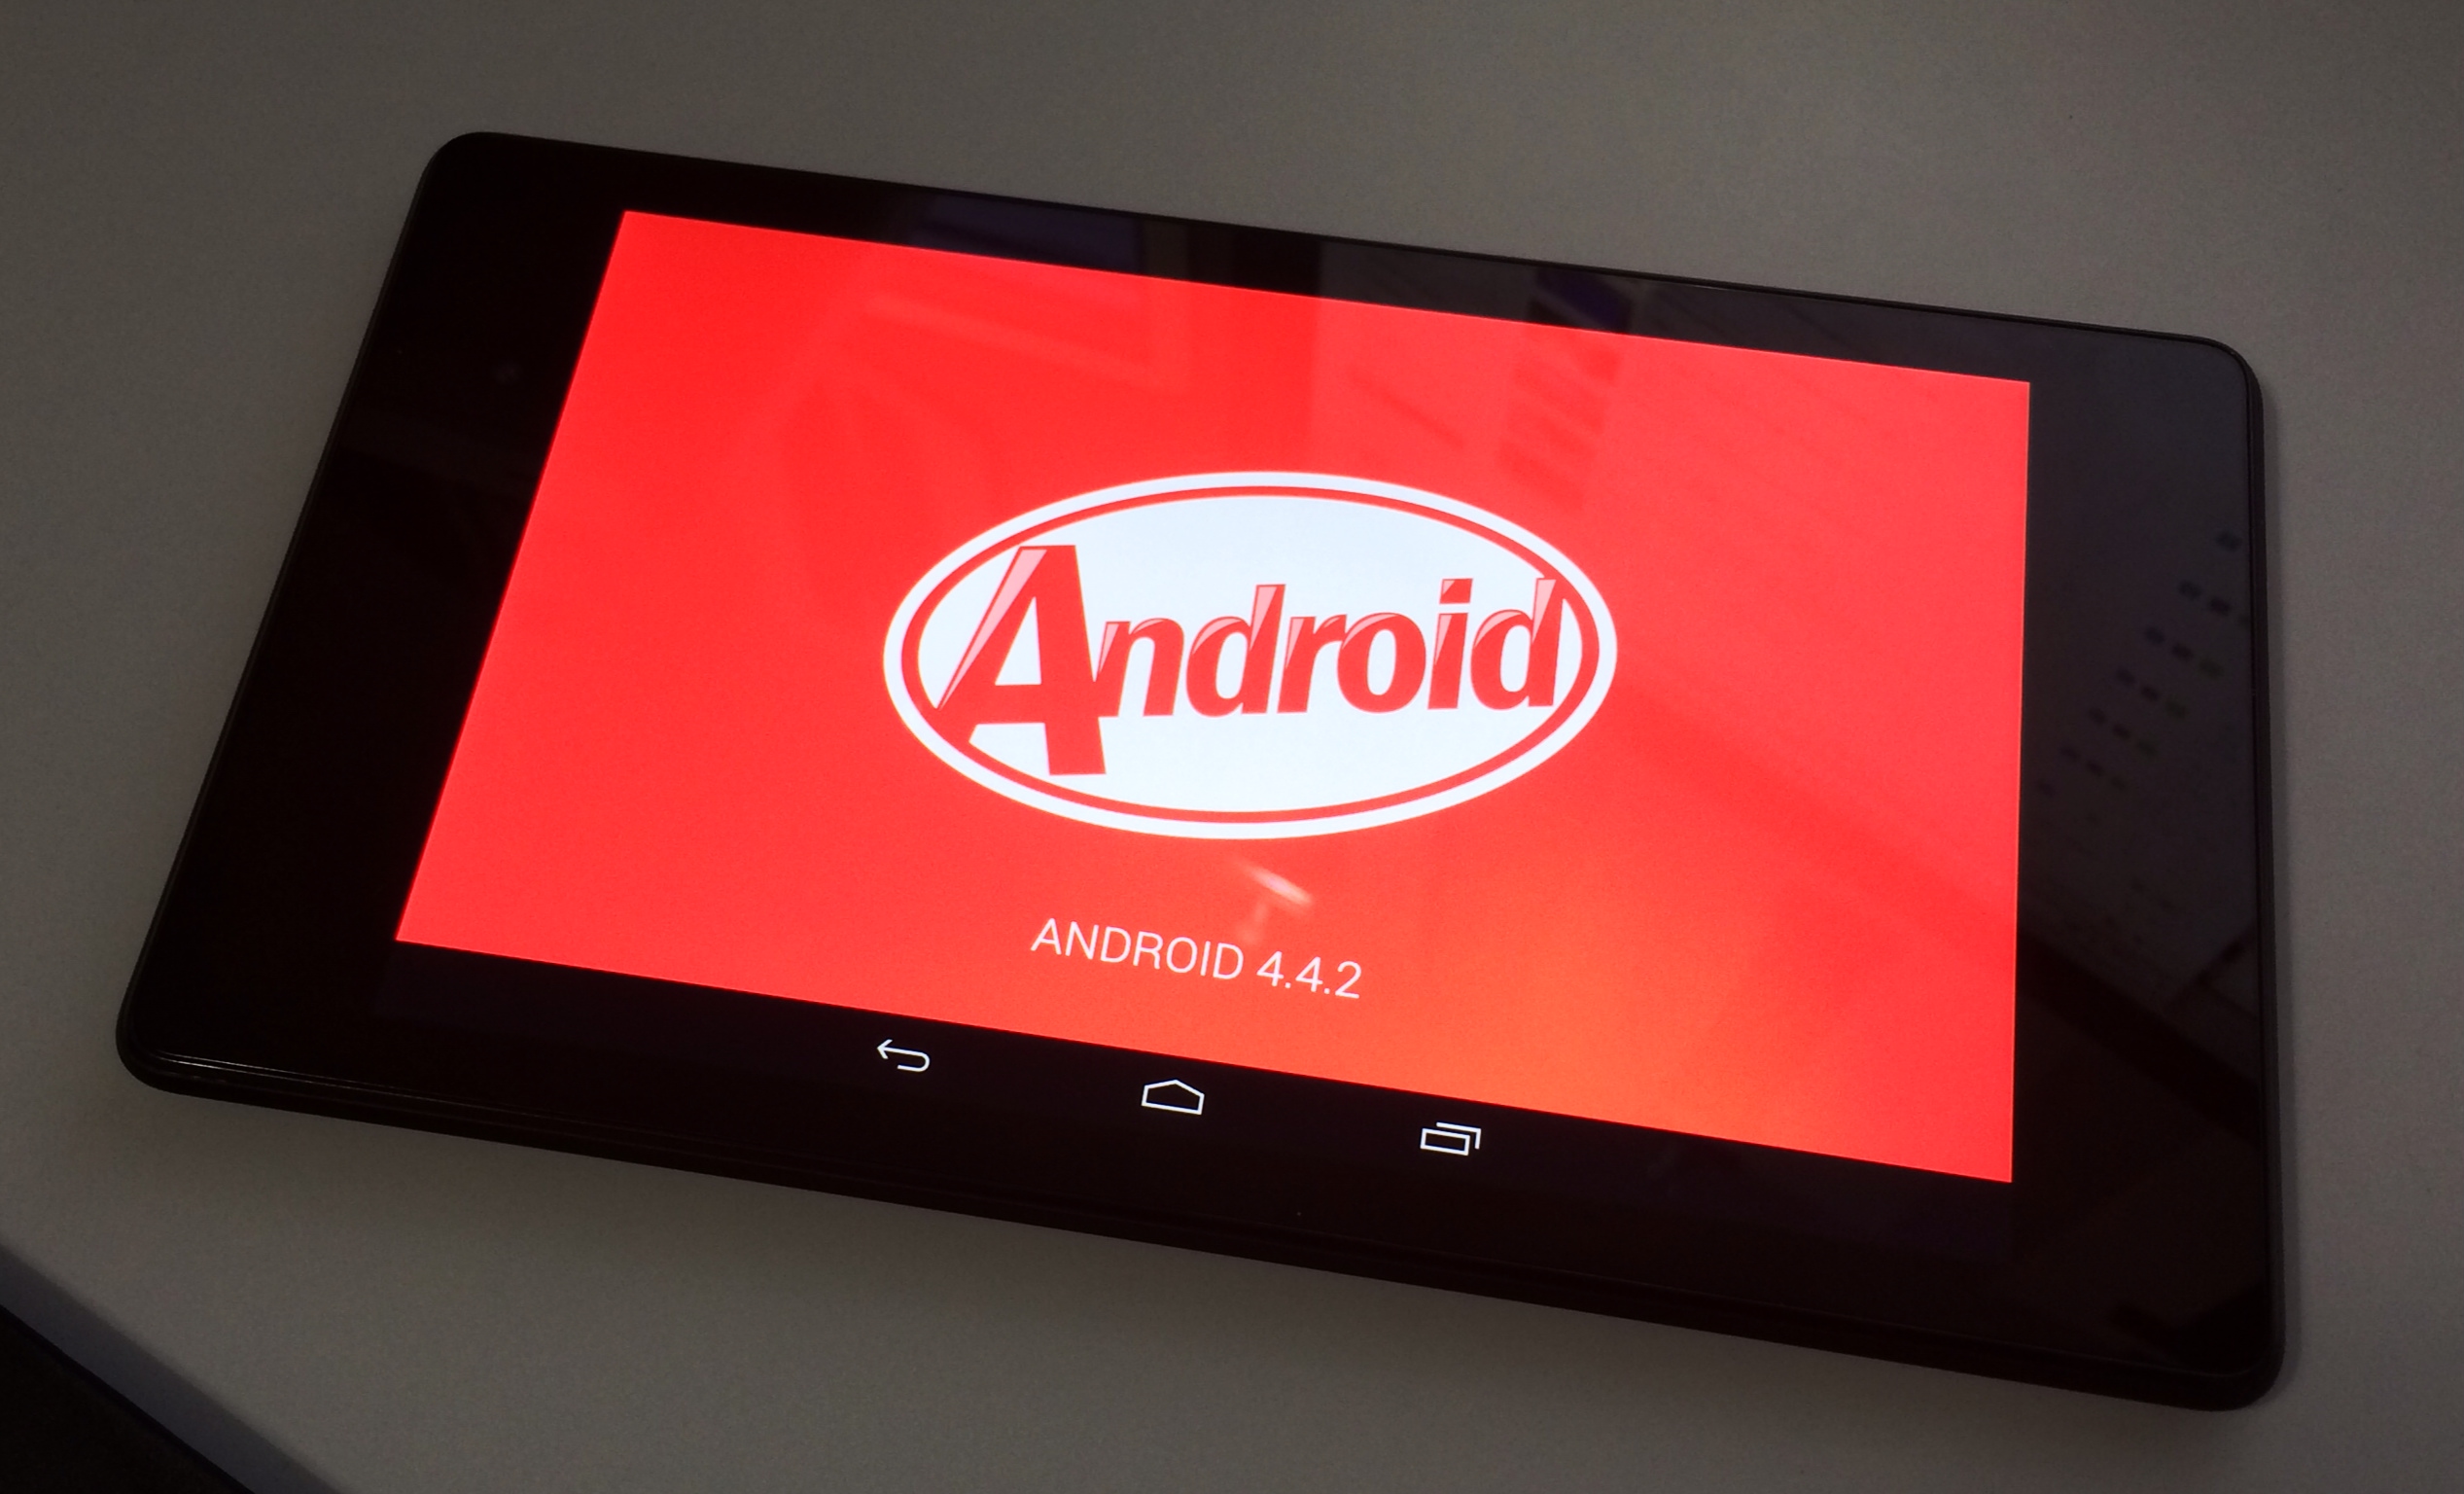 Check out what's new and a potential Nexus 7 Android 4.4.2 issue.